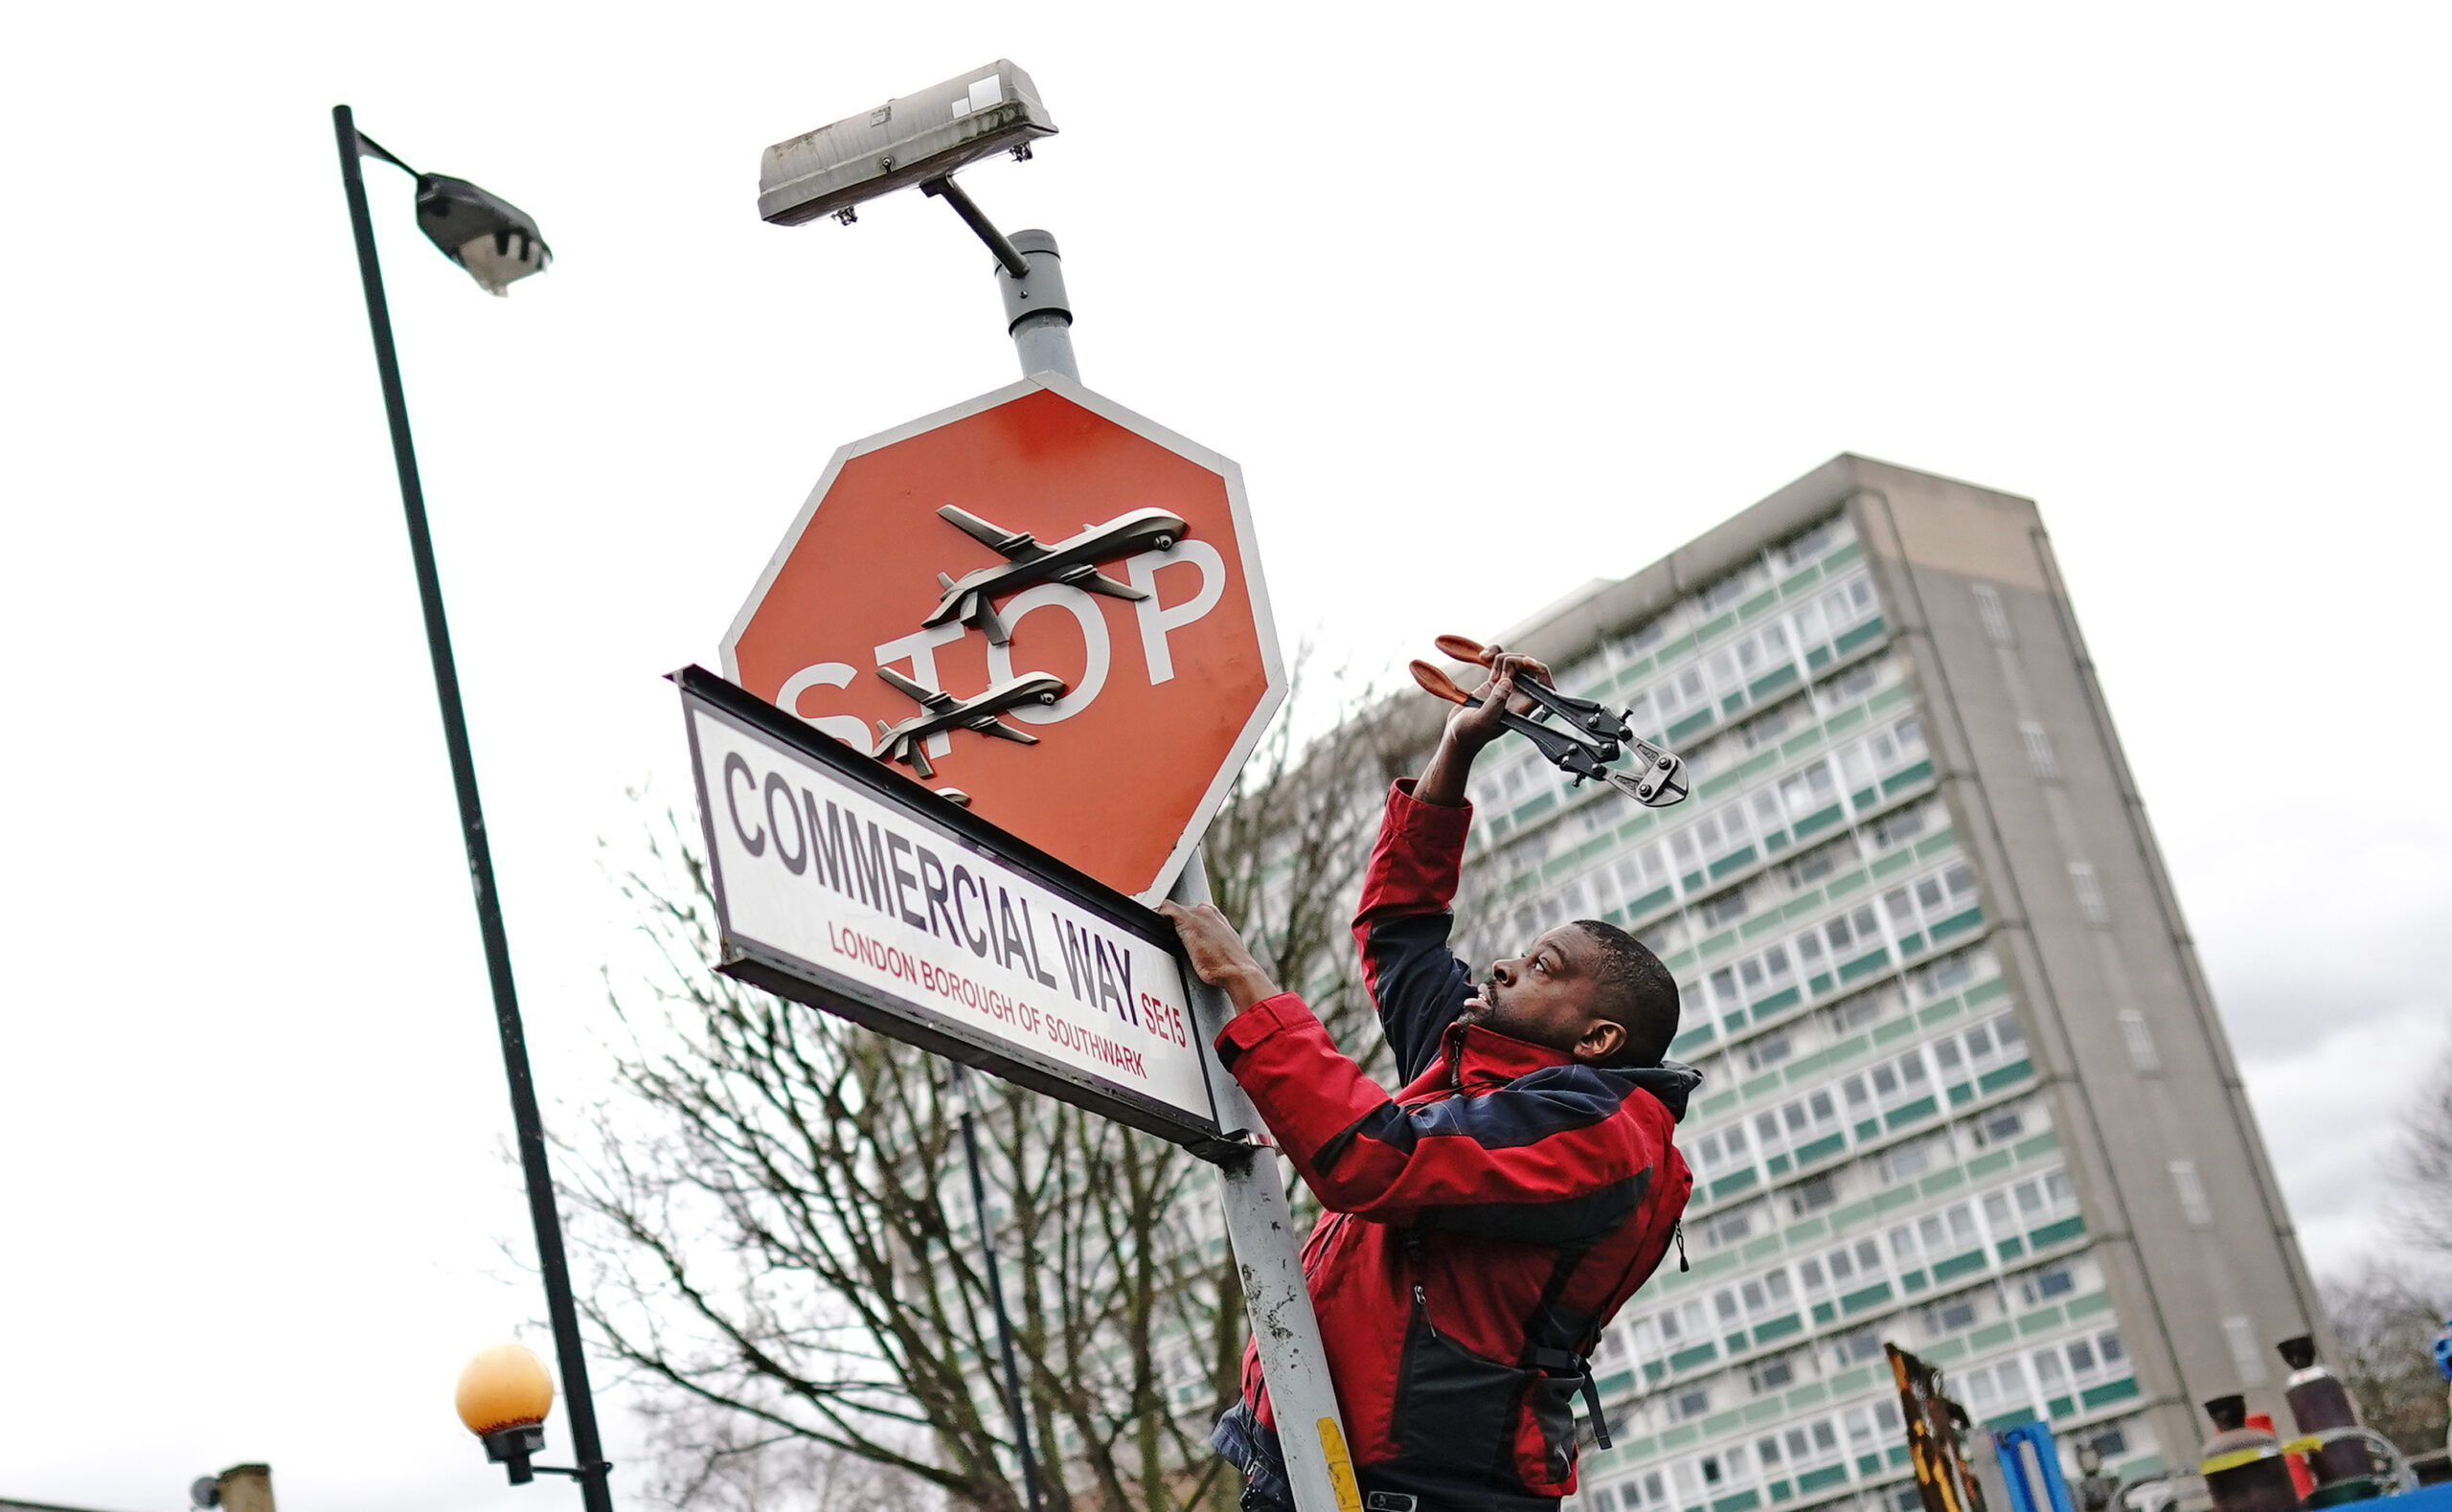 Man holds up bolt cutters to red stop sign